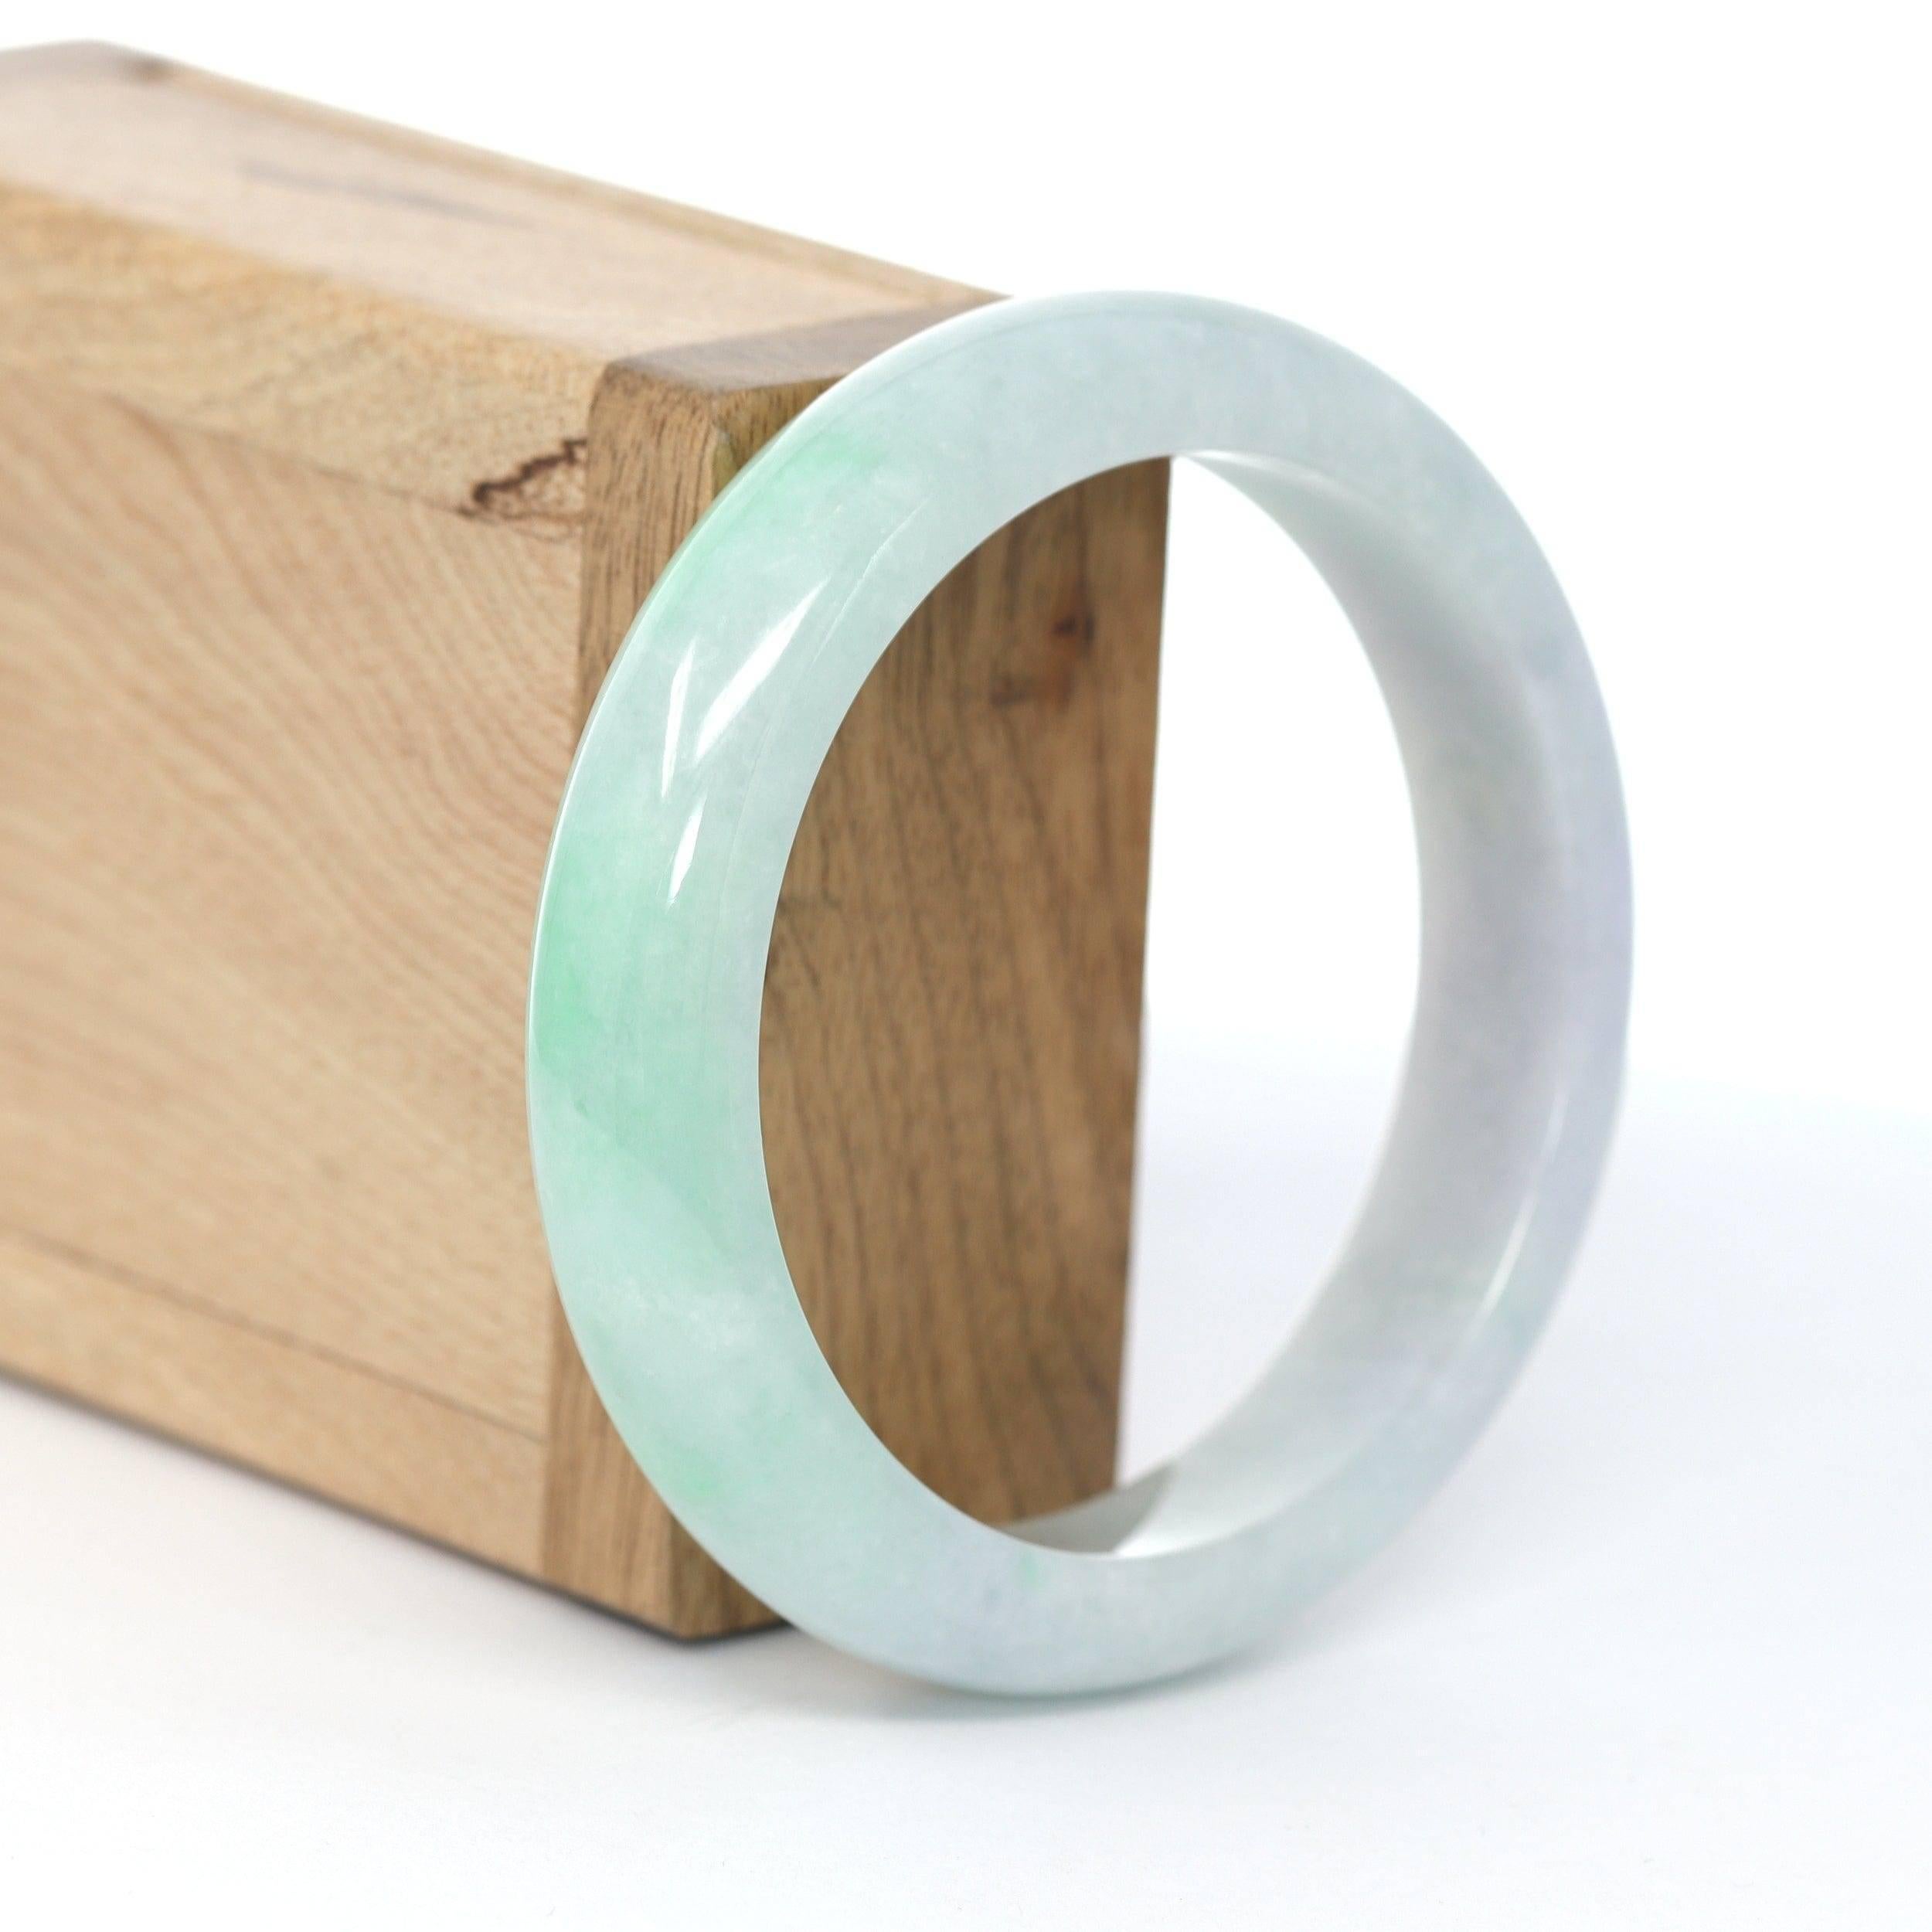 * DETAILS--- Genuine Burmese Jadeite Jade Bangle Bracelet. This bangle is made with fine genuine Burmese Jadeite jade. The jade texture is fine and smooth with green color. It just has little clouds and a natural stone line. The Classic half-round